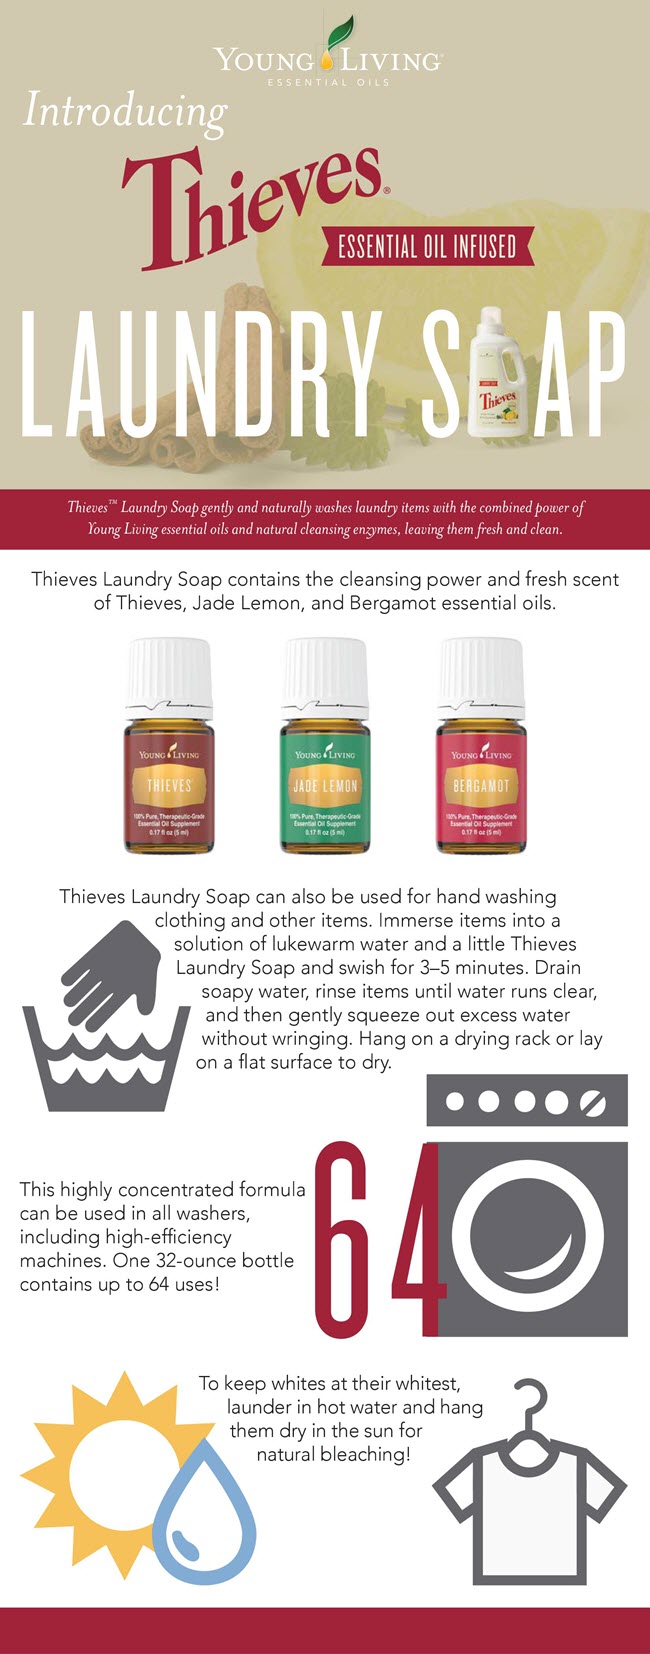 Thieves Laundry Soap infographic